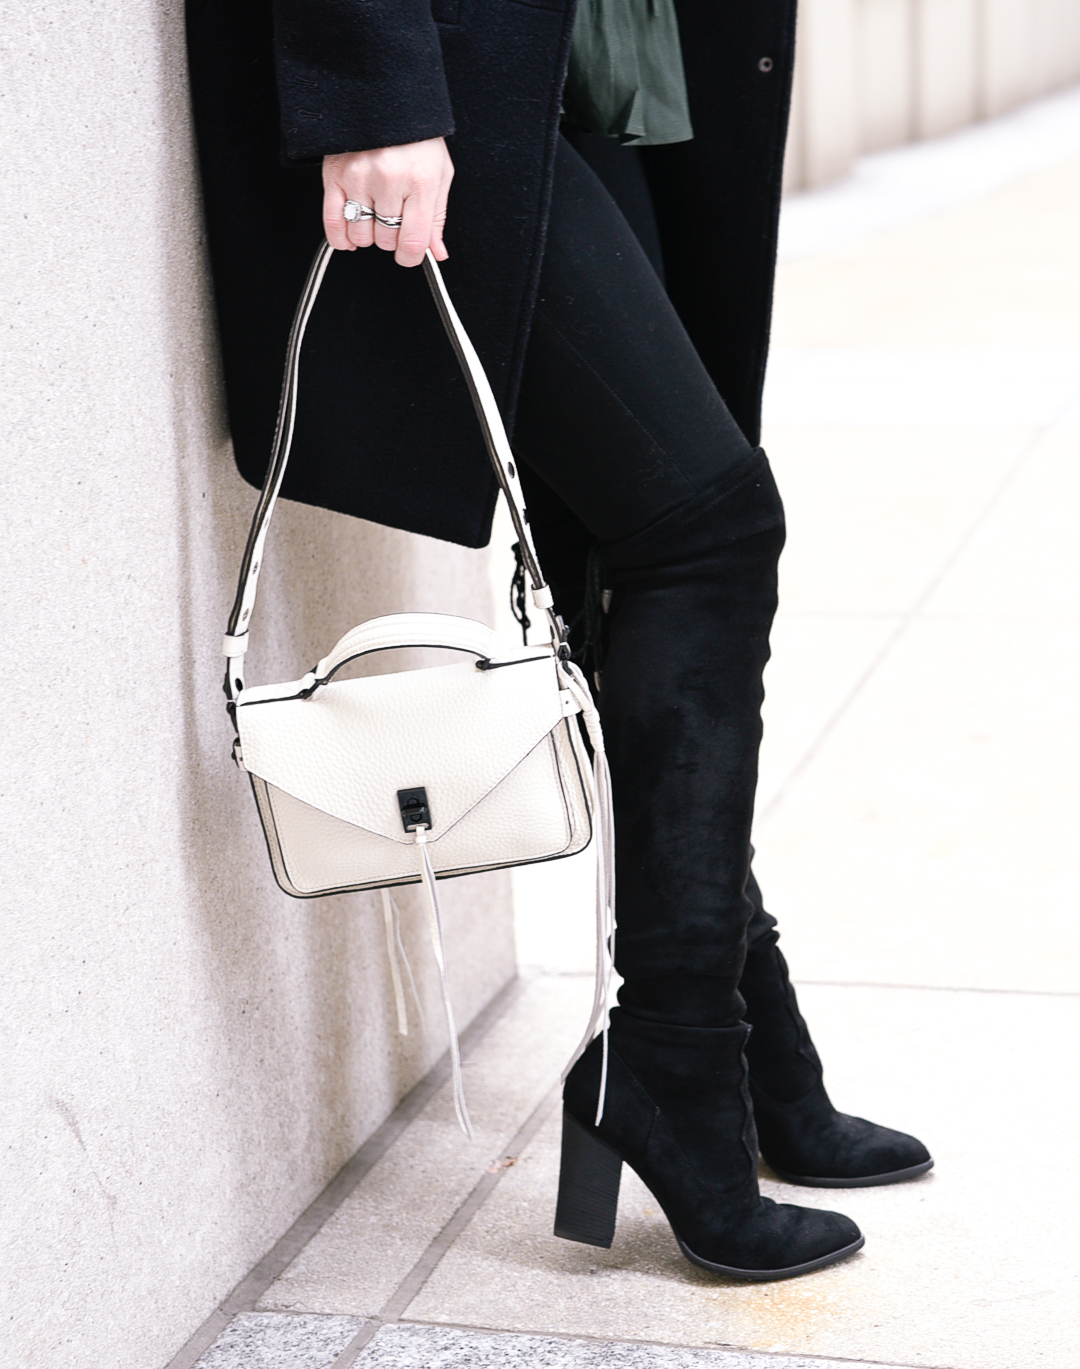 Black suede over the knee boots and a Rebecca Minkoff white satchel. 